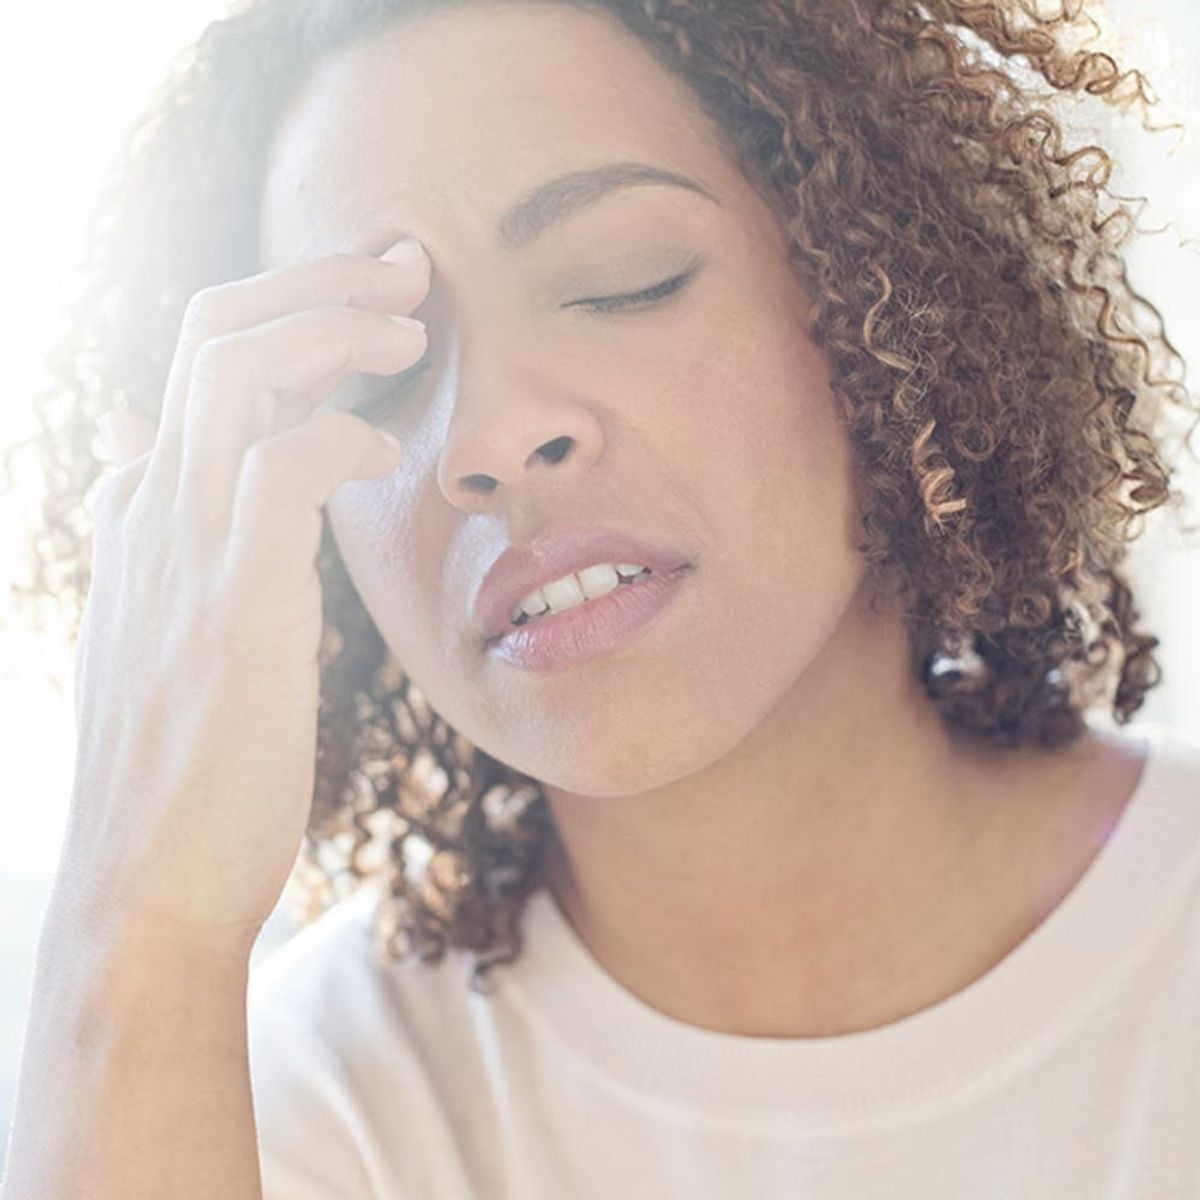 7 Potential Migraine Triggers You Might Not Think Of